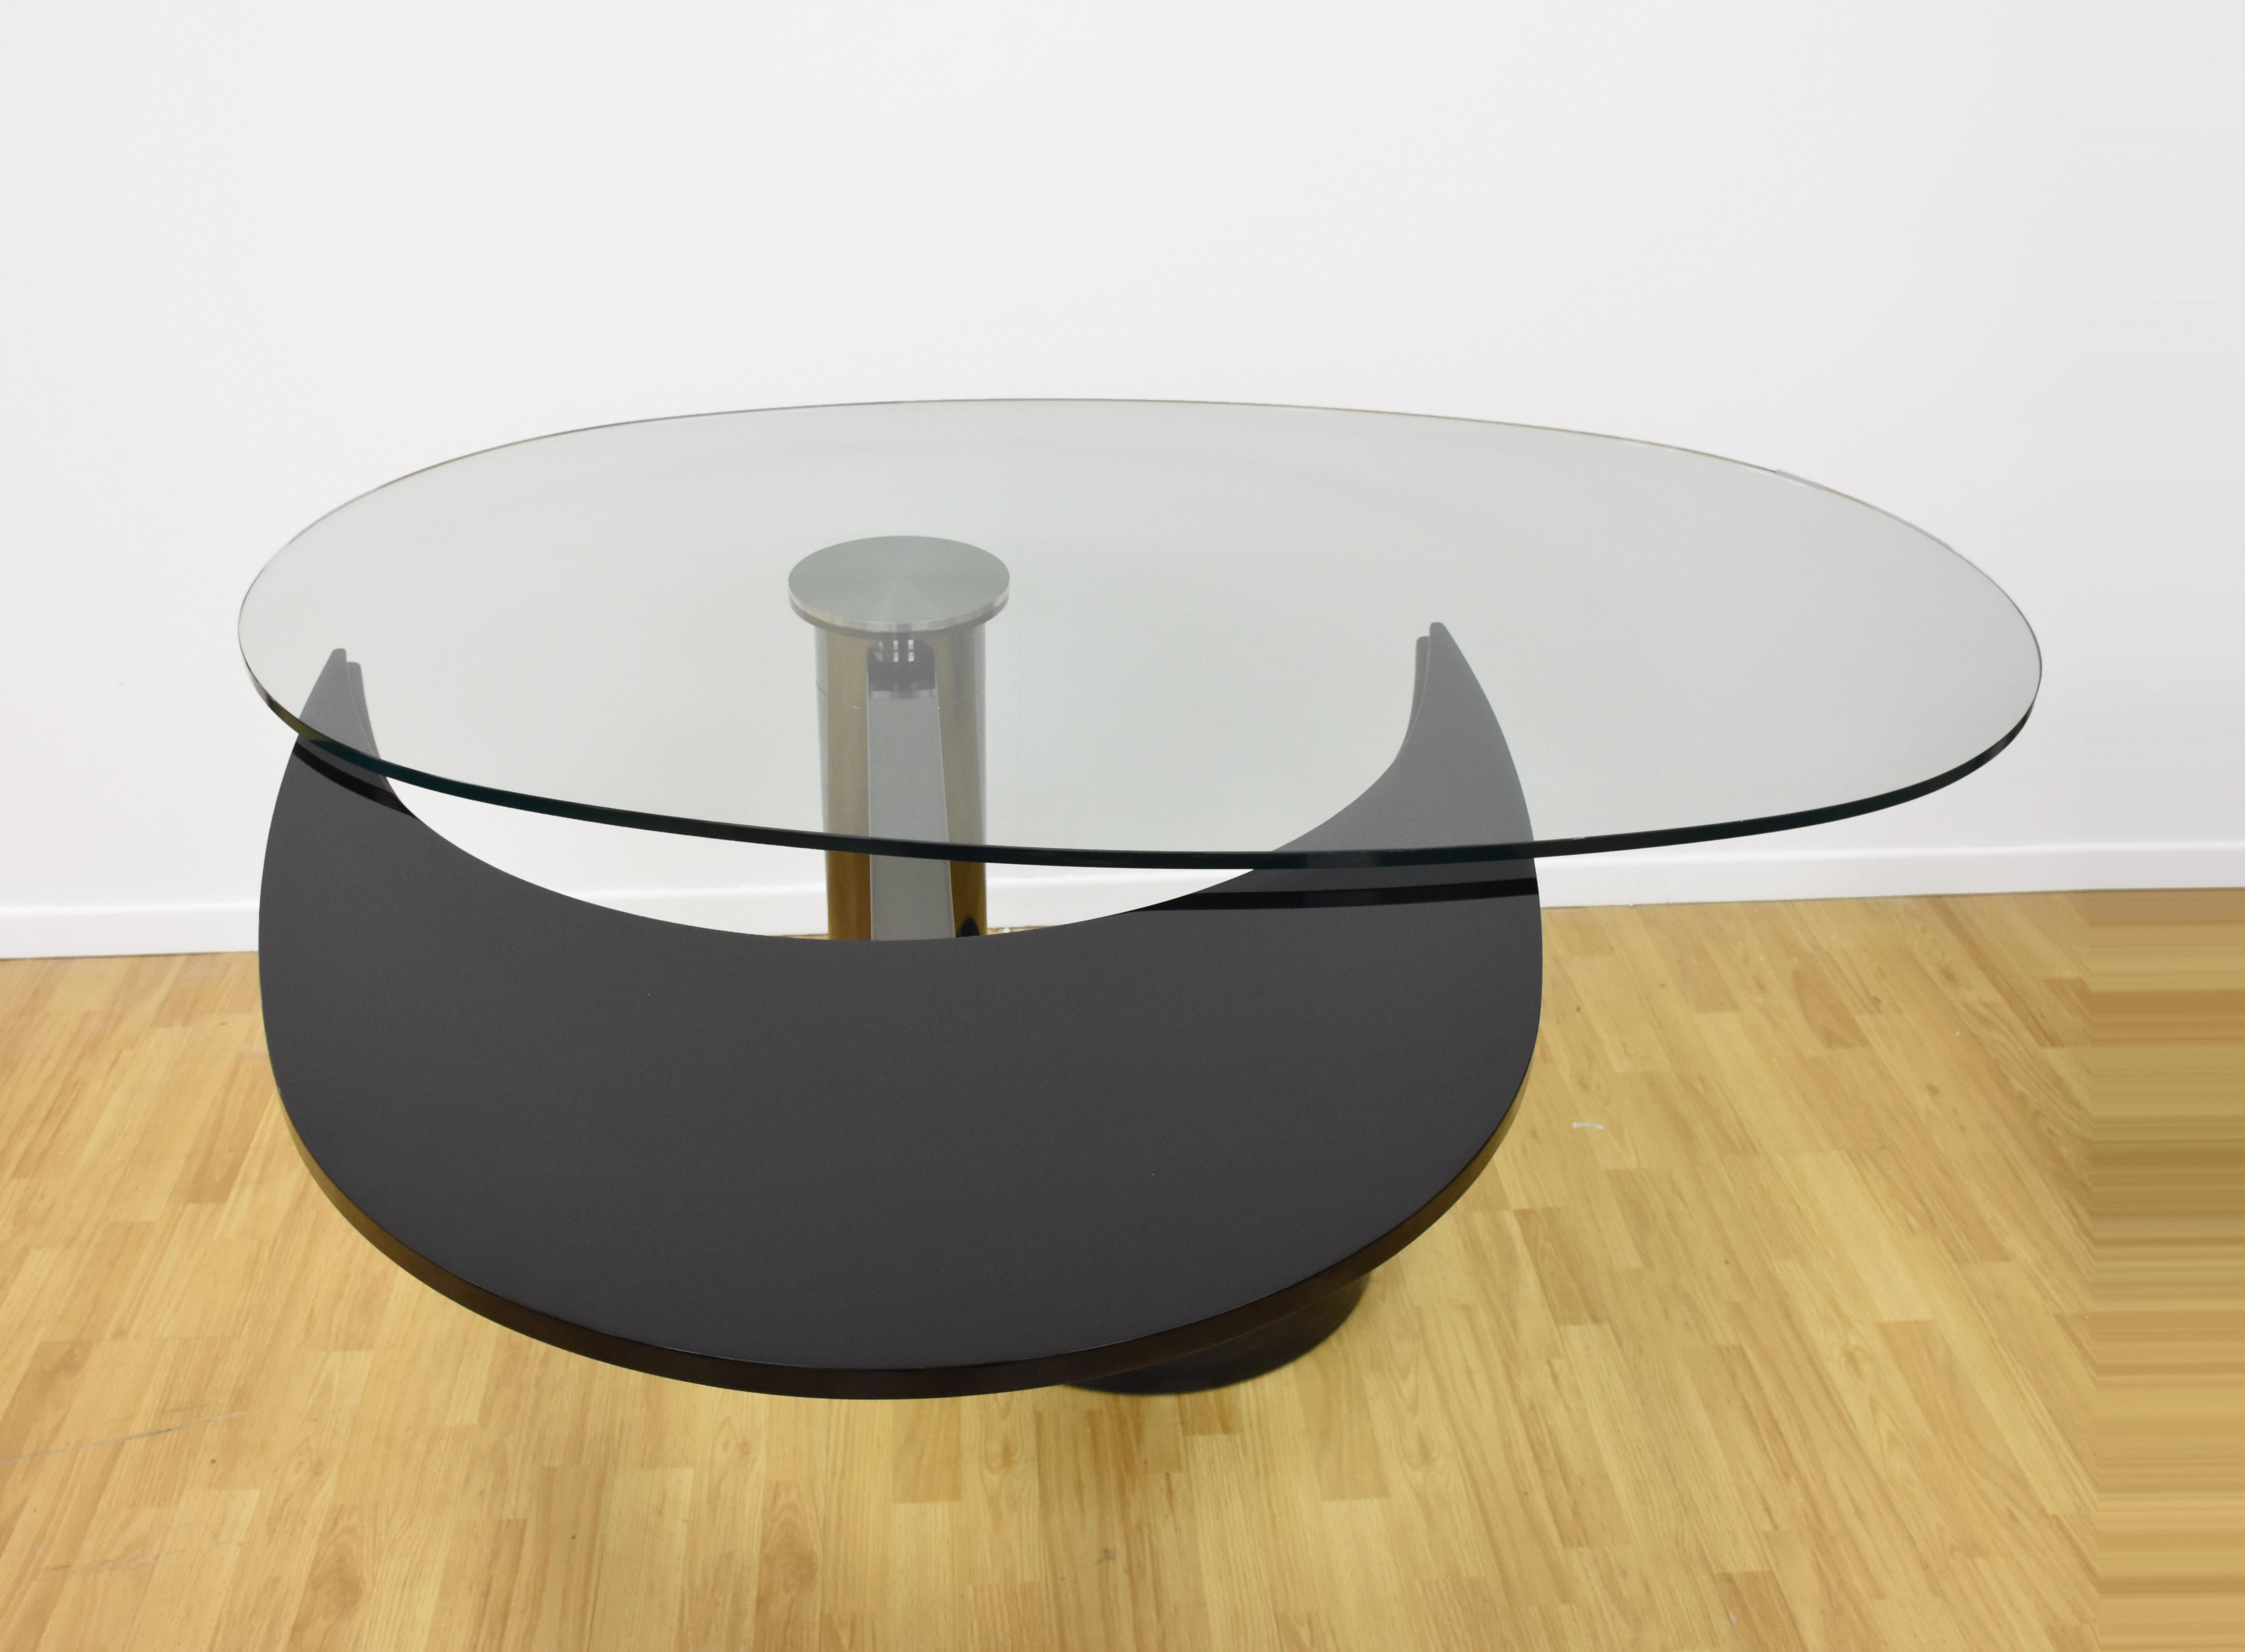 French Midcentury Steel and Glass Oval Revolving Dining Table after Pierre Cardin 1960s